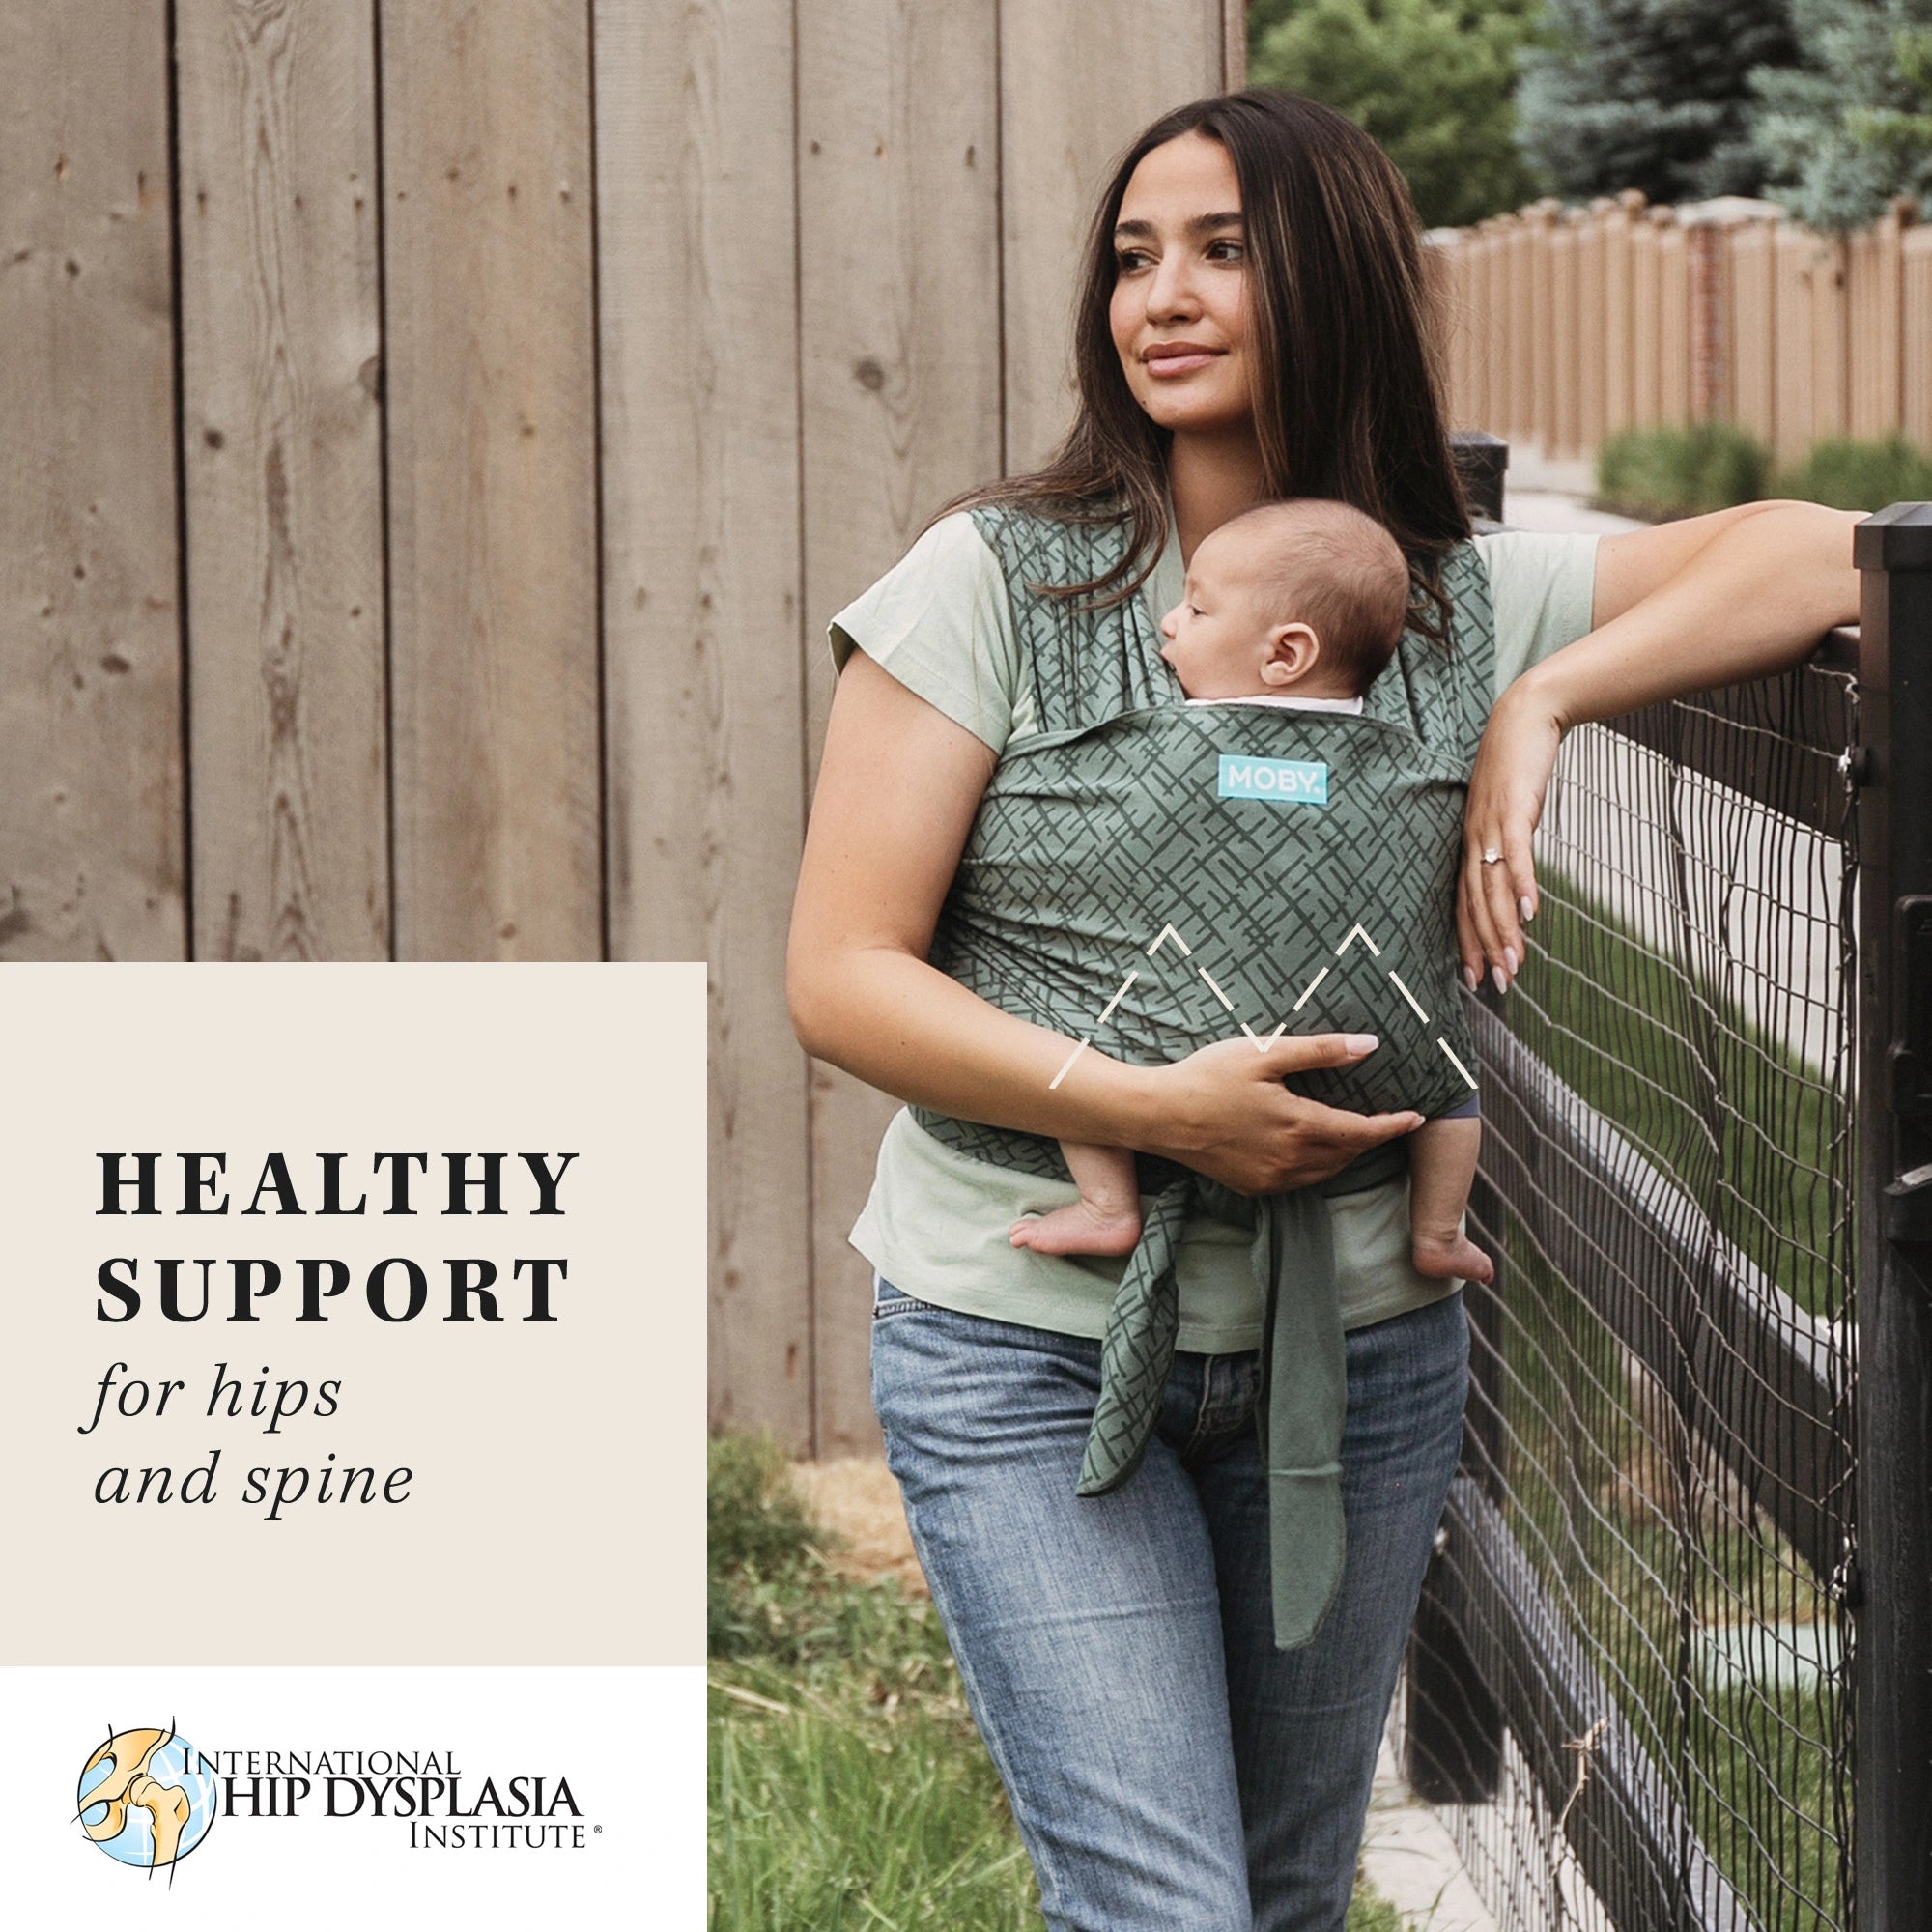 moby wrap healthy support for hips and spine certified by international hip dysplasia institute